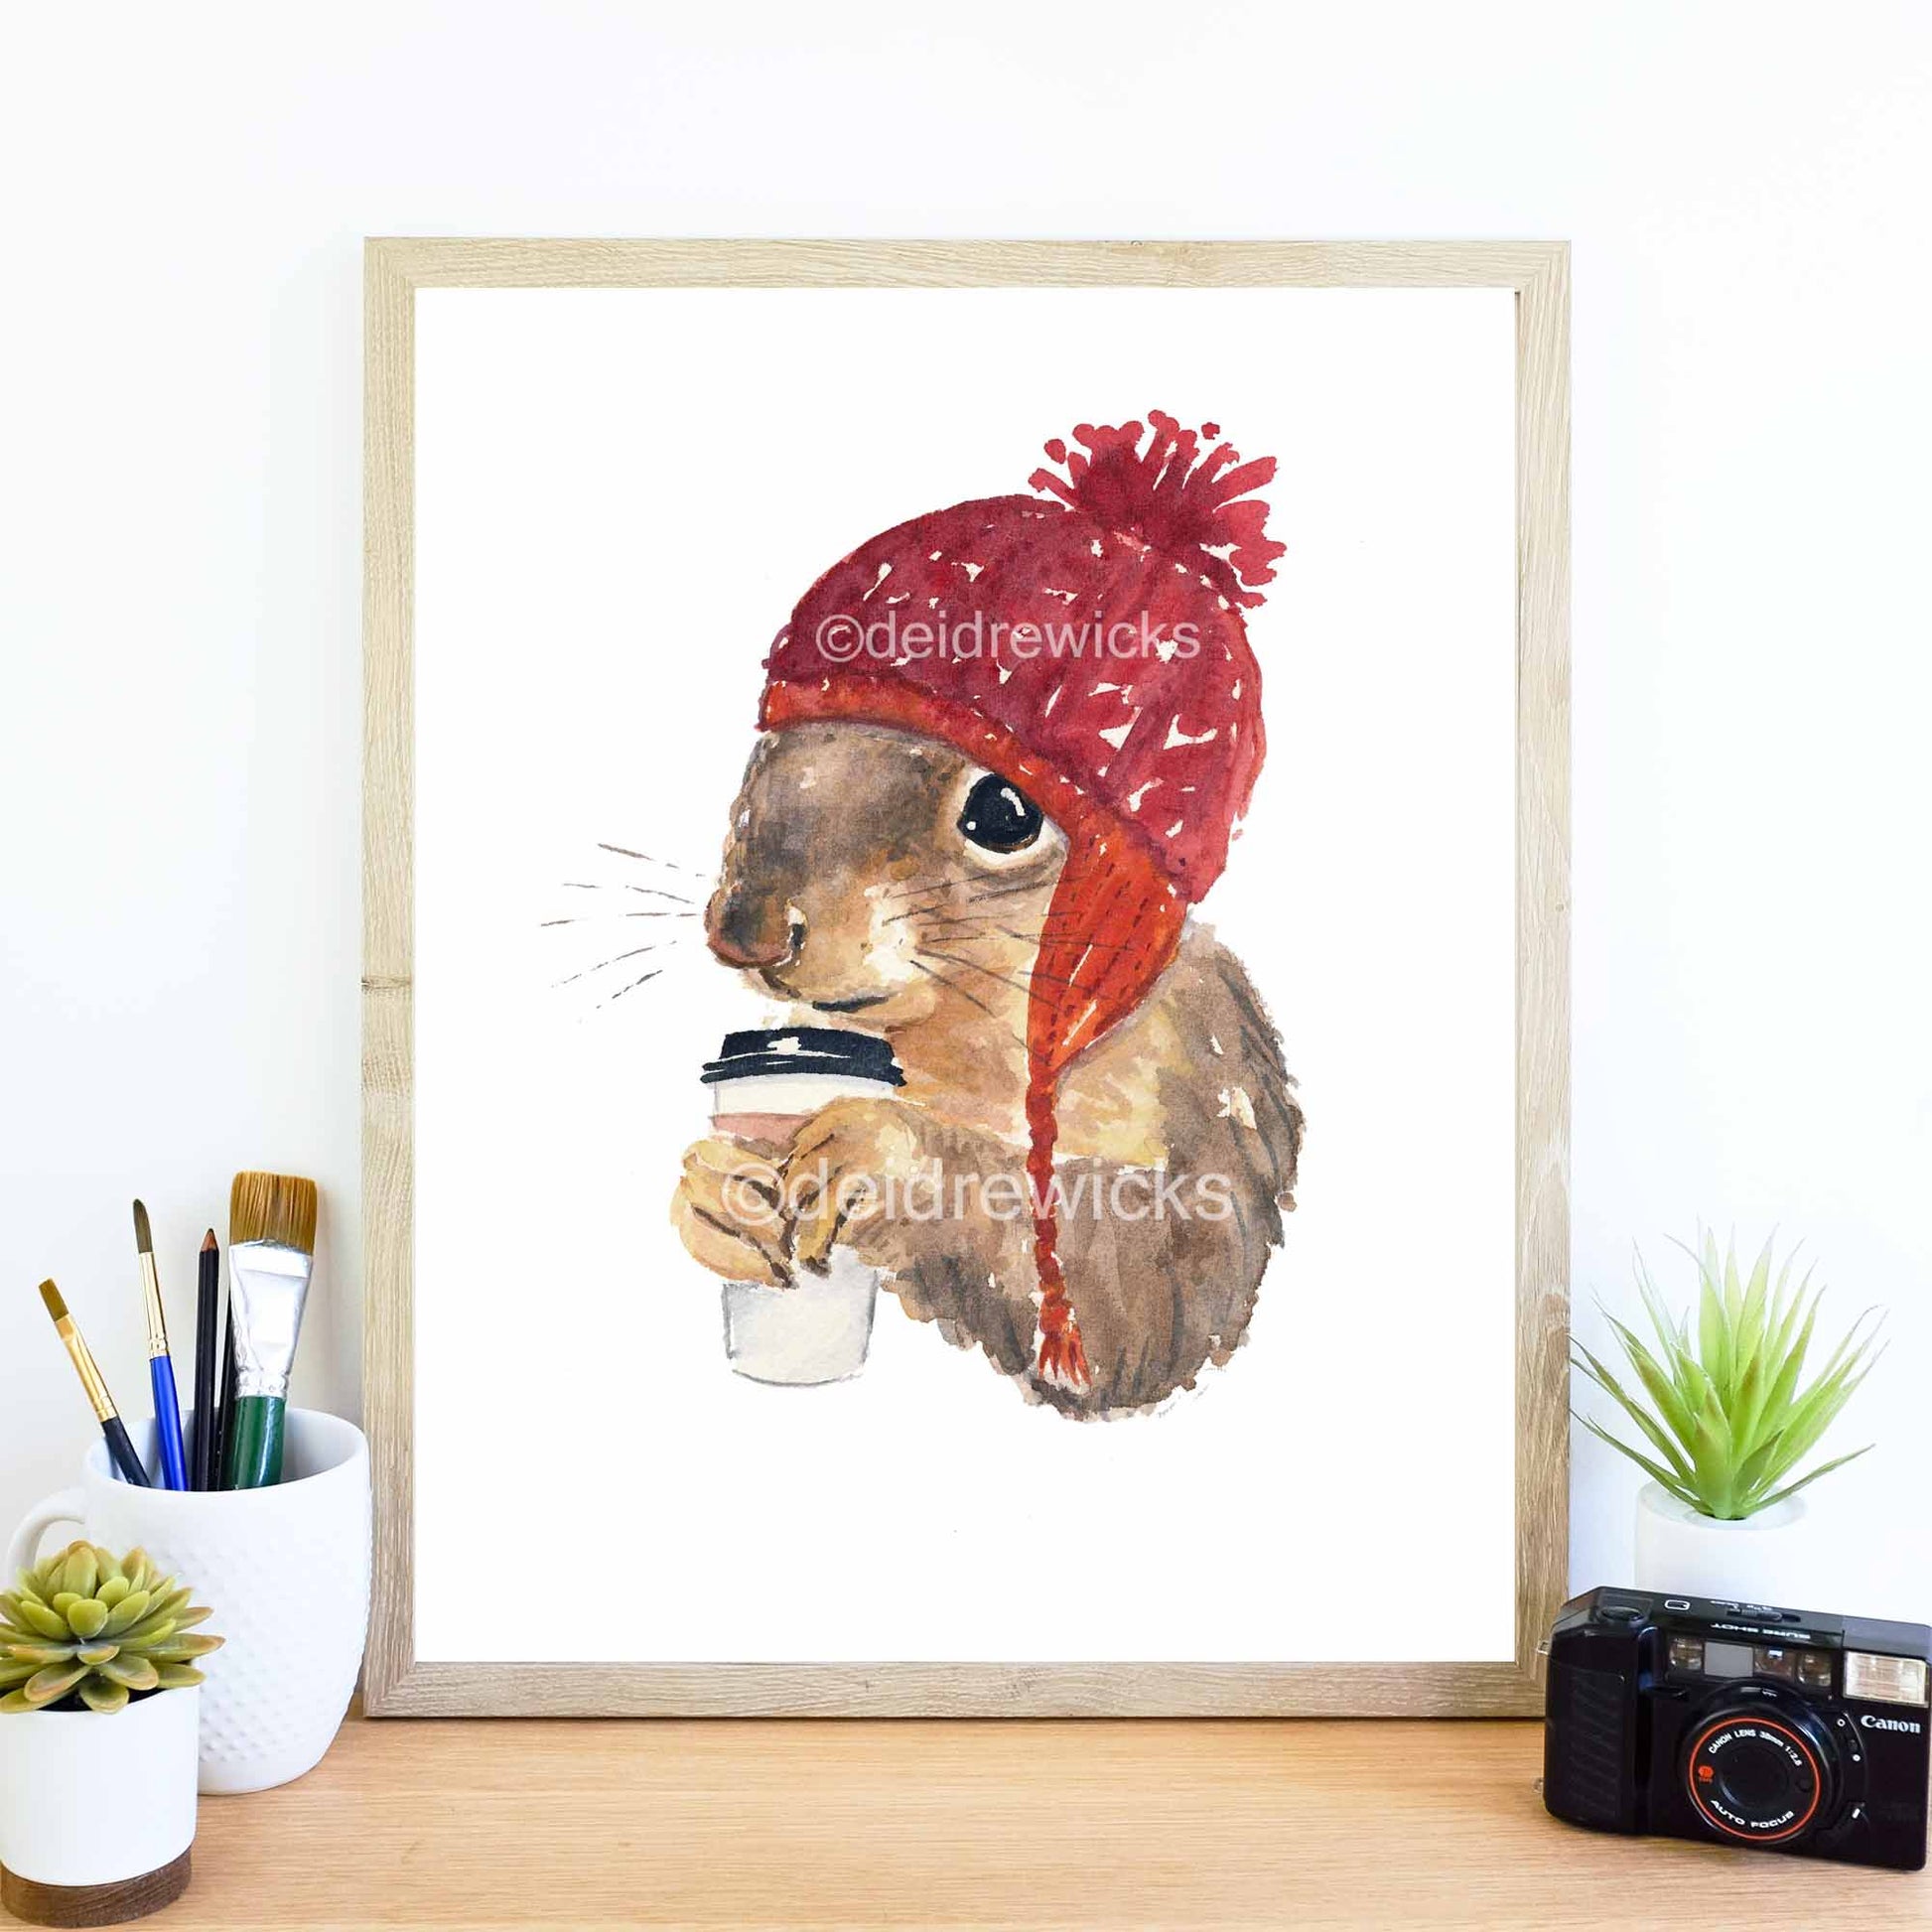 Framed example of a coffee drinking squirrel in a knit hat